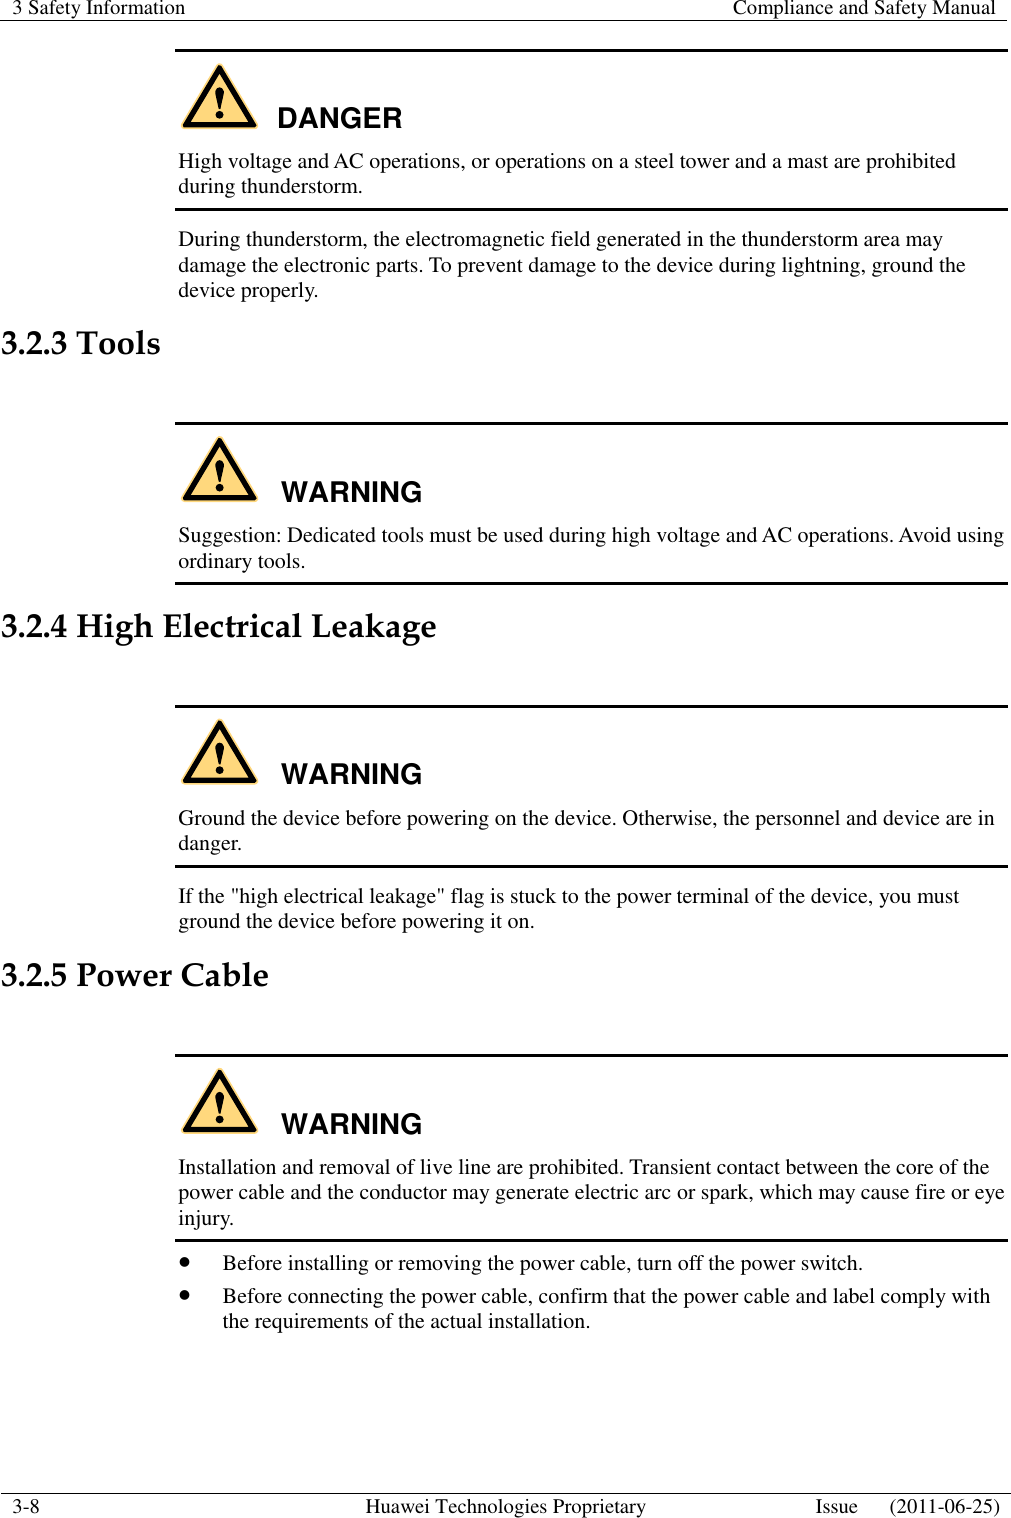 3 Safety Information    Compliance and Safety Manual  3-8 Huawei Technologies Proprietary Issue      (2011-06-25)  DANGER High voltage and AC operations, or operations on a steel tower and a mast are prohibited during thunderstorm. During thunderstorm, the electromagnetic field generated in the thunderstorm area may damage the electronic parts. To prevent damage to the device during lightning, ground the device properly. 3.2.3 Tools  WARNING Suggestion: Dedicated tools must be used during high voltage and AC operations. Avoid using ordinary tools. 3.2.4 High Electrical Leakage  WARNING Ground the device before powering on the device. Otherwise, the personnel and device are in danger. If the &quot;high electrical leakage&quot; flag is stuck to the power terminal of the device, you must ground the device before powering it on. 3.2.5 Power Cable  WARNING Installation and removal of live line are prohibited. Transient contact between the core of the power cable and the conductor may generate electric arc or spark, which may cause fire or eye injury.  Before installing or removing the power cable, turn off the power switch.  Before connecting the power cable, confirm that the power cable and label comply with the requirements of the actual installation.  